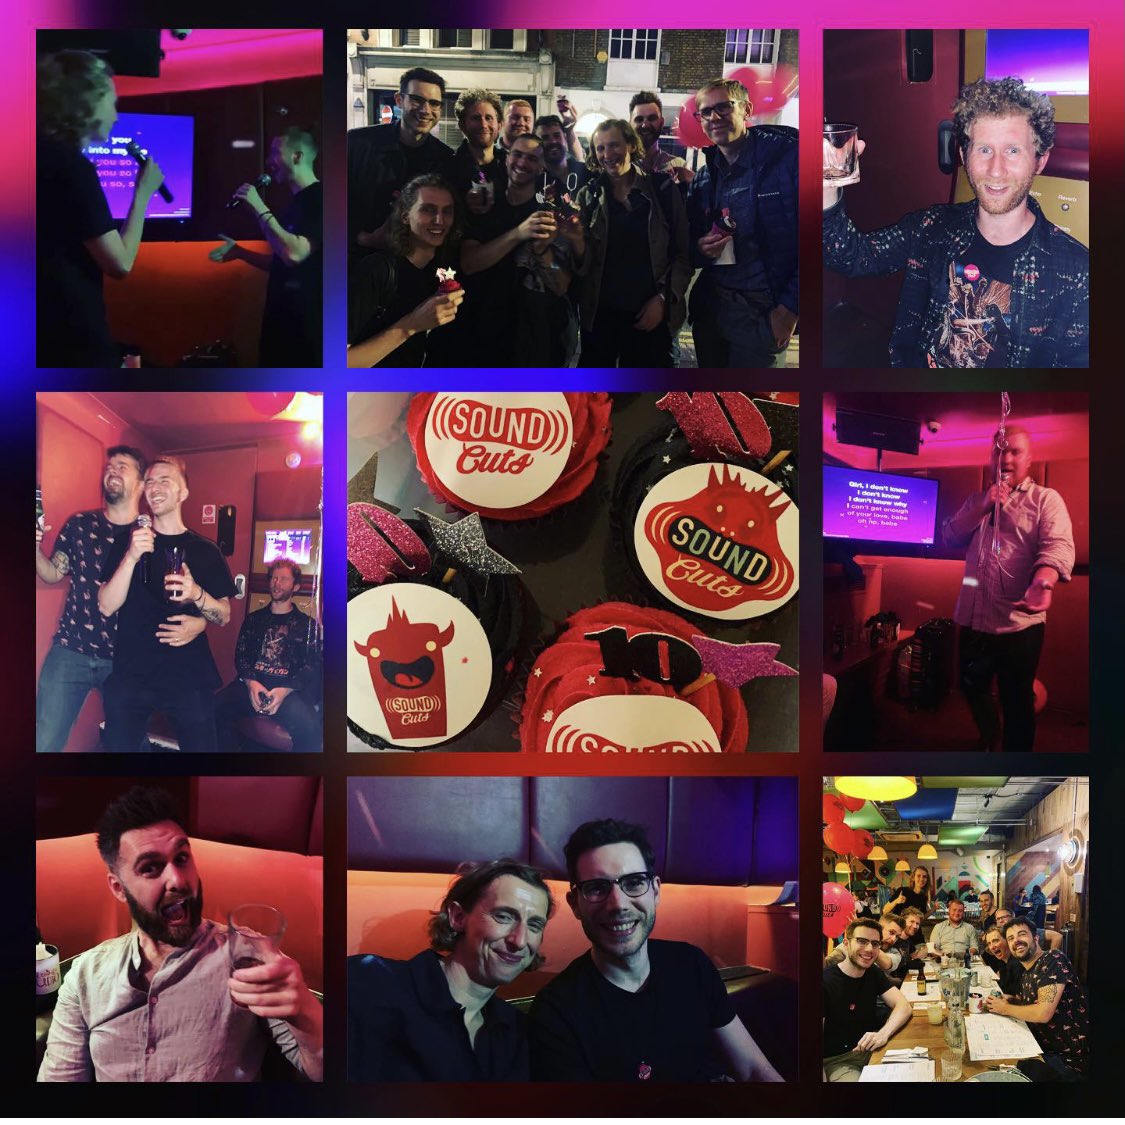 We finally had our Christmas2019/Christmas2020/Soundcuts10thBirthday night out. Sore throats this morning! #bestteam #birthday #karaoke